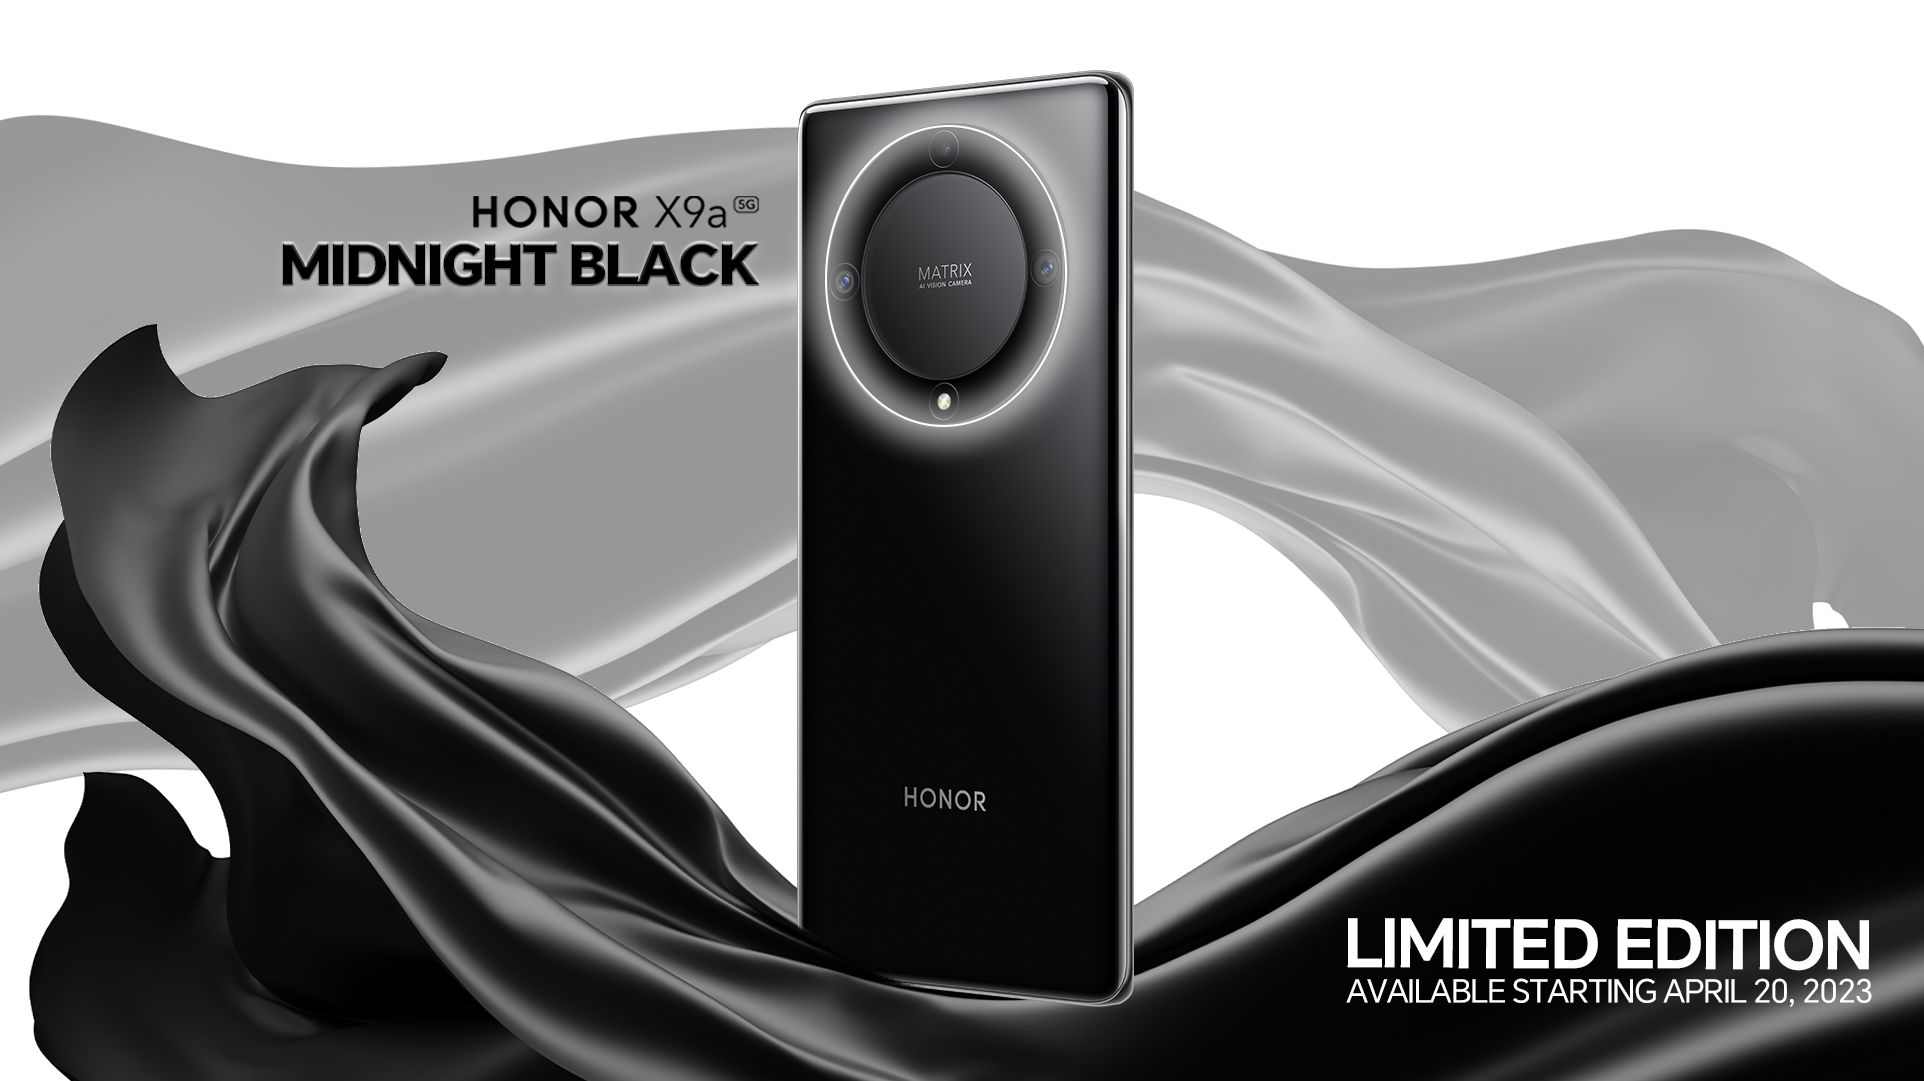 Main KV - Limited-edition HONOR X9a 5G Midnight Black to officially hit stores on April 20